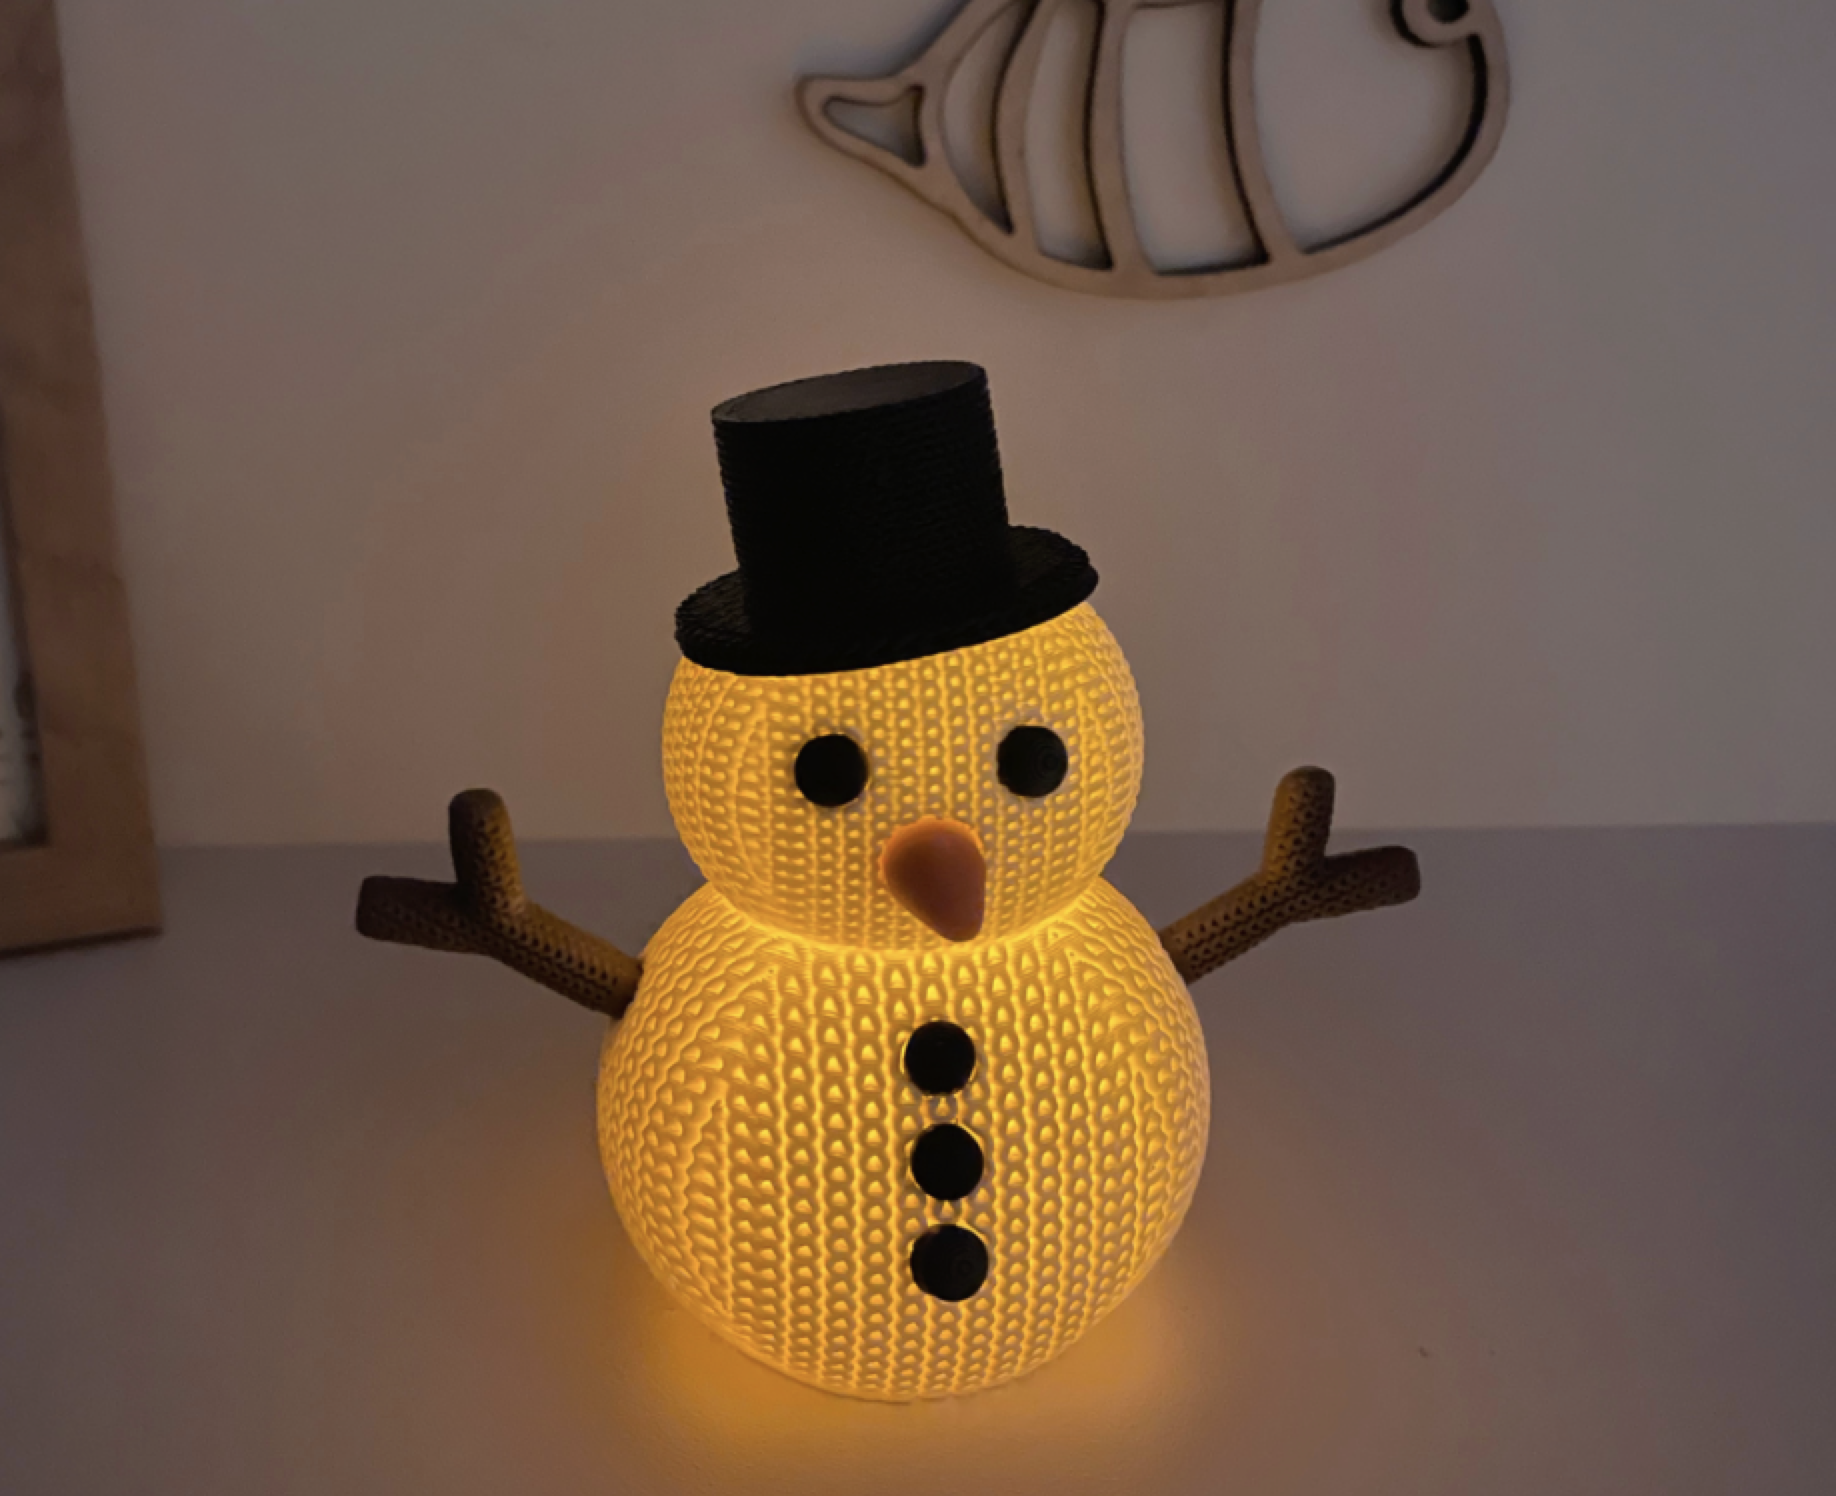 3D Printed Knitted Snowman Candle Figurine - Festive Christmas Ornament - GoodBuy.ai